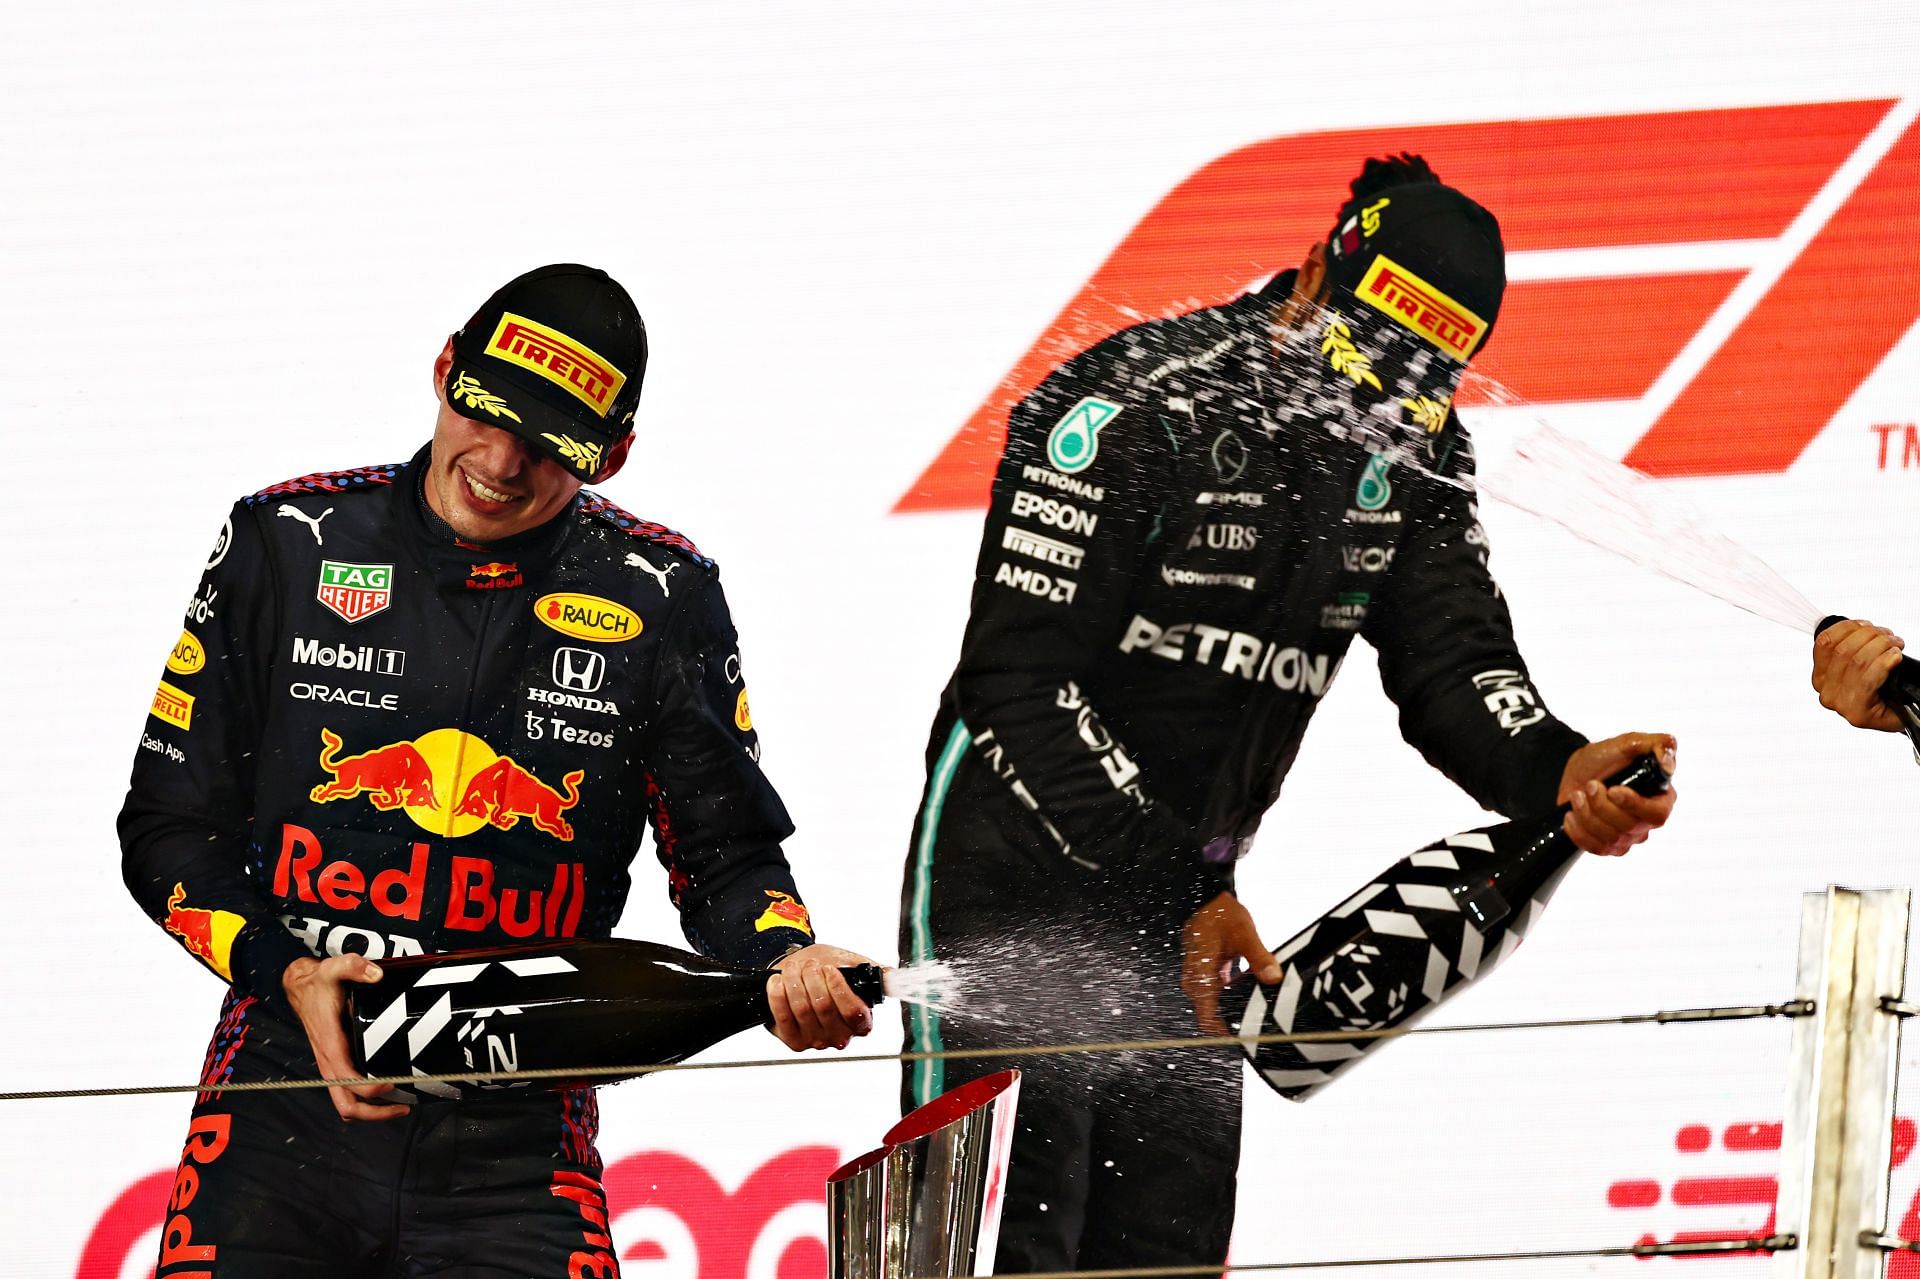 Race winner Lewis Hamilton and second-placed Max Verstappen celebrate on the podium after the 2021 Qatar Grand Prix.